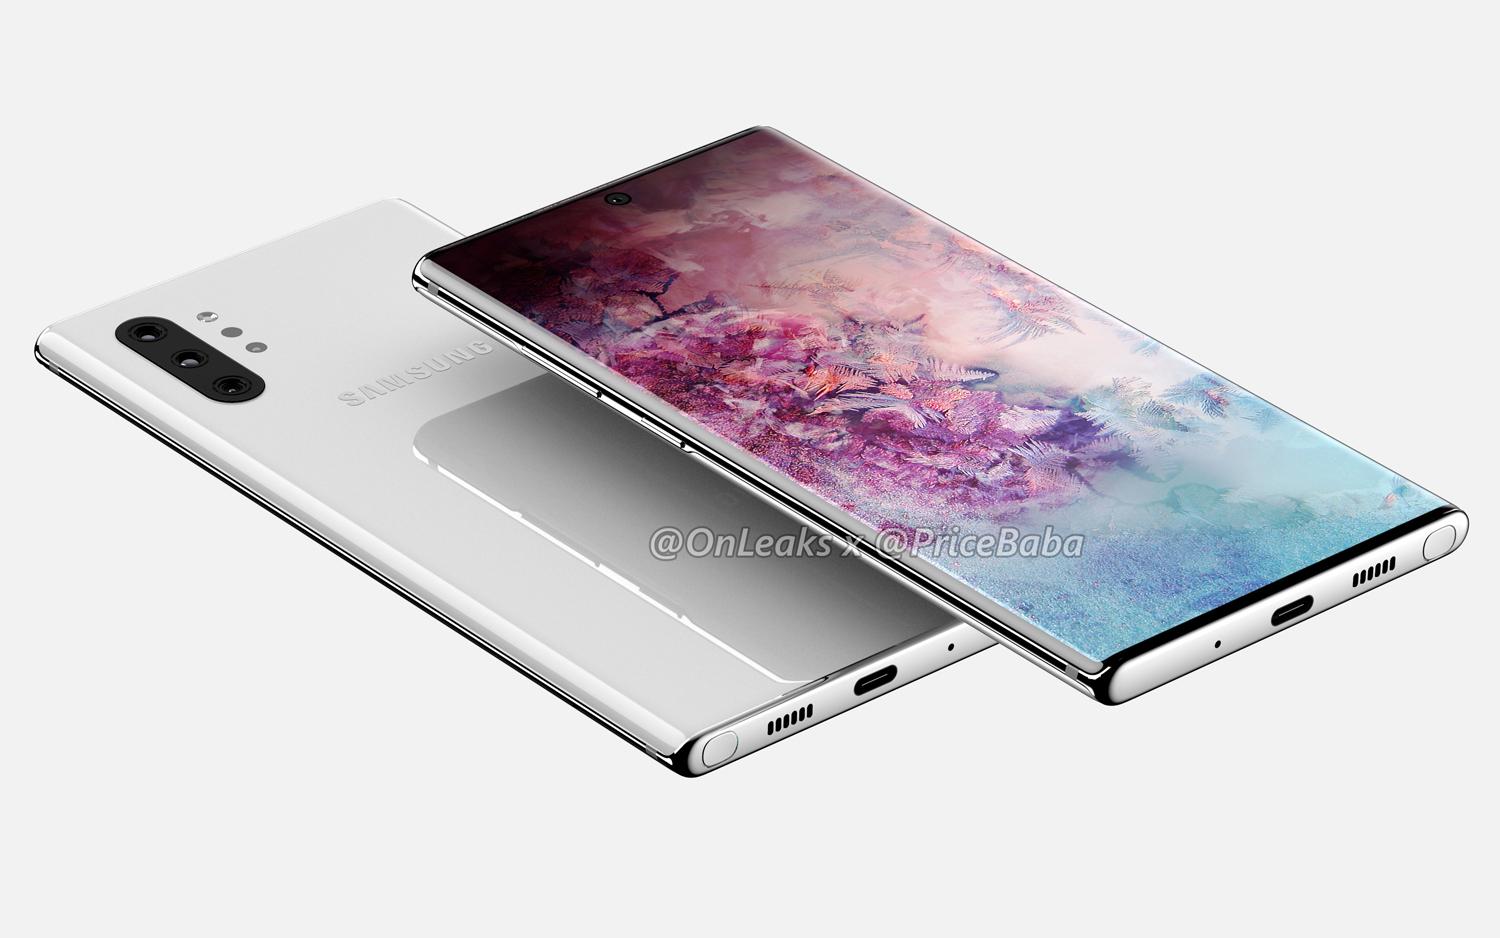 Galaxy Note 10 Pro Renders Show Massive 6.75-inch Screen, 4 Cameras and No 3.5mm Jack